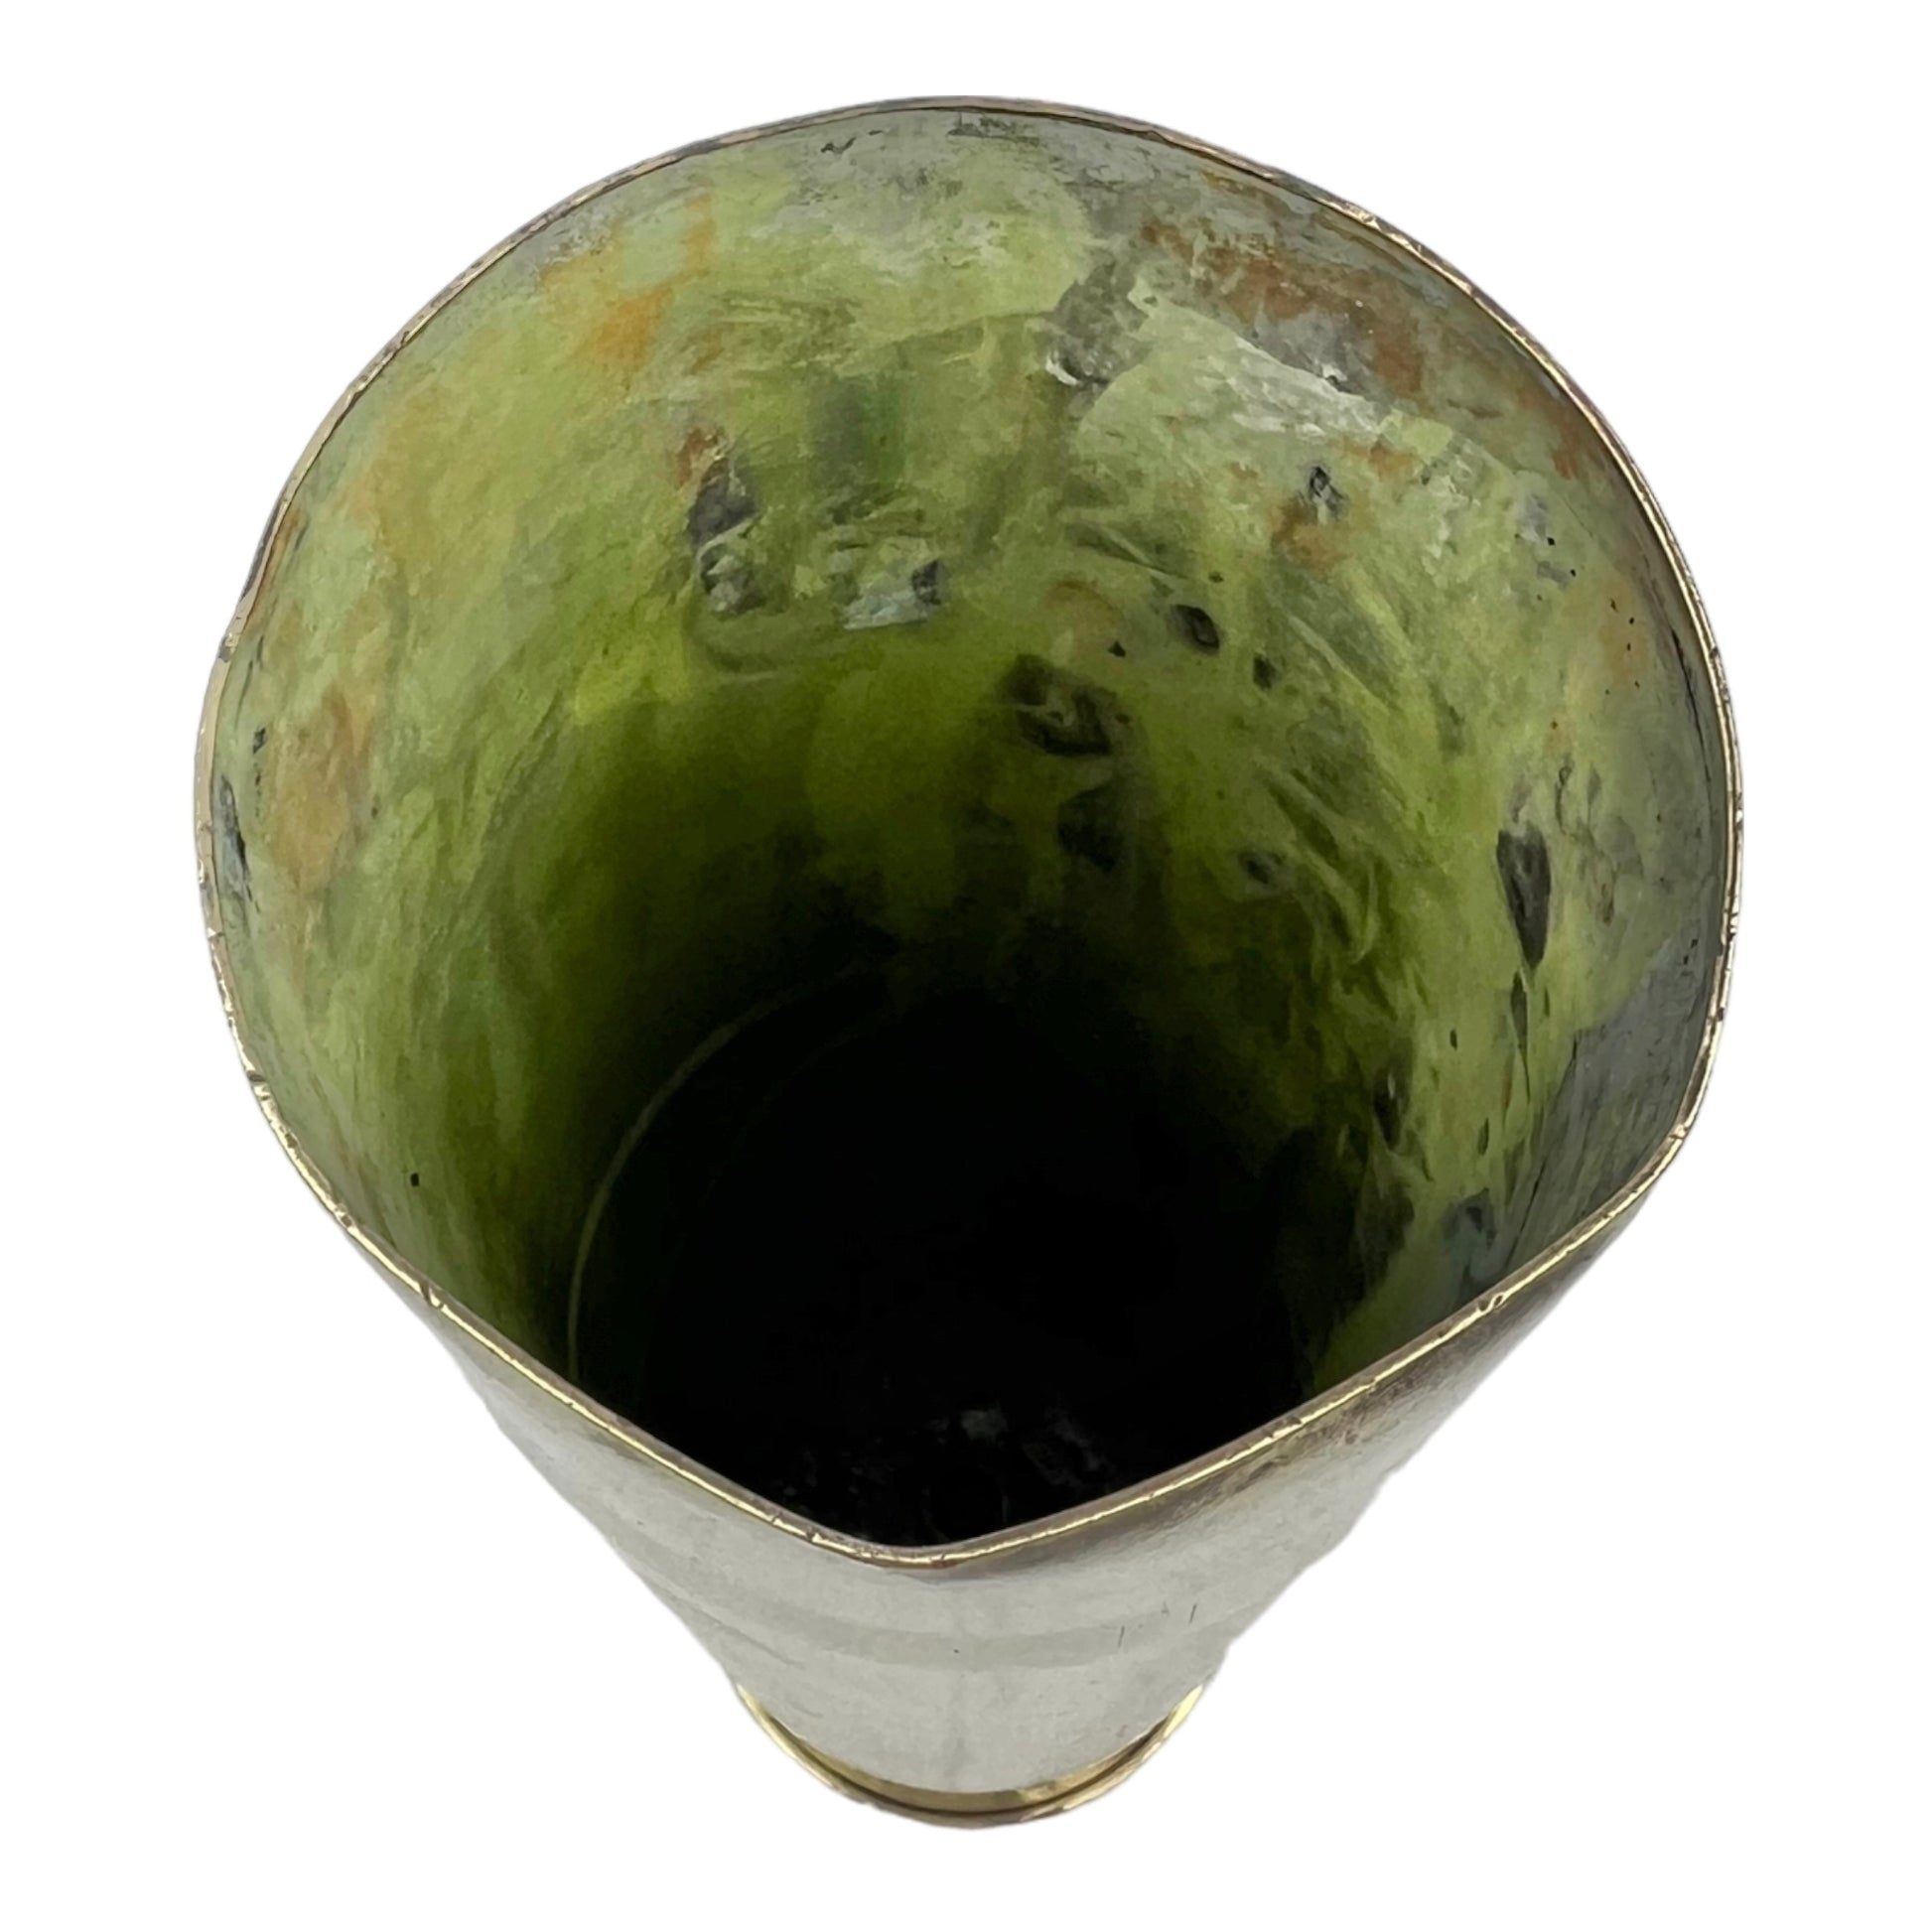 inside image of French Ww1 brass shell case sold by All Things French Store